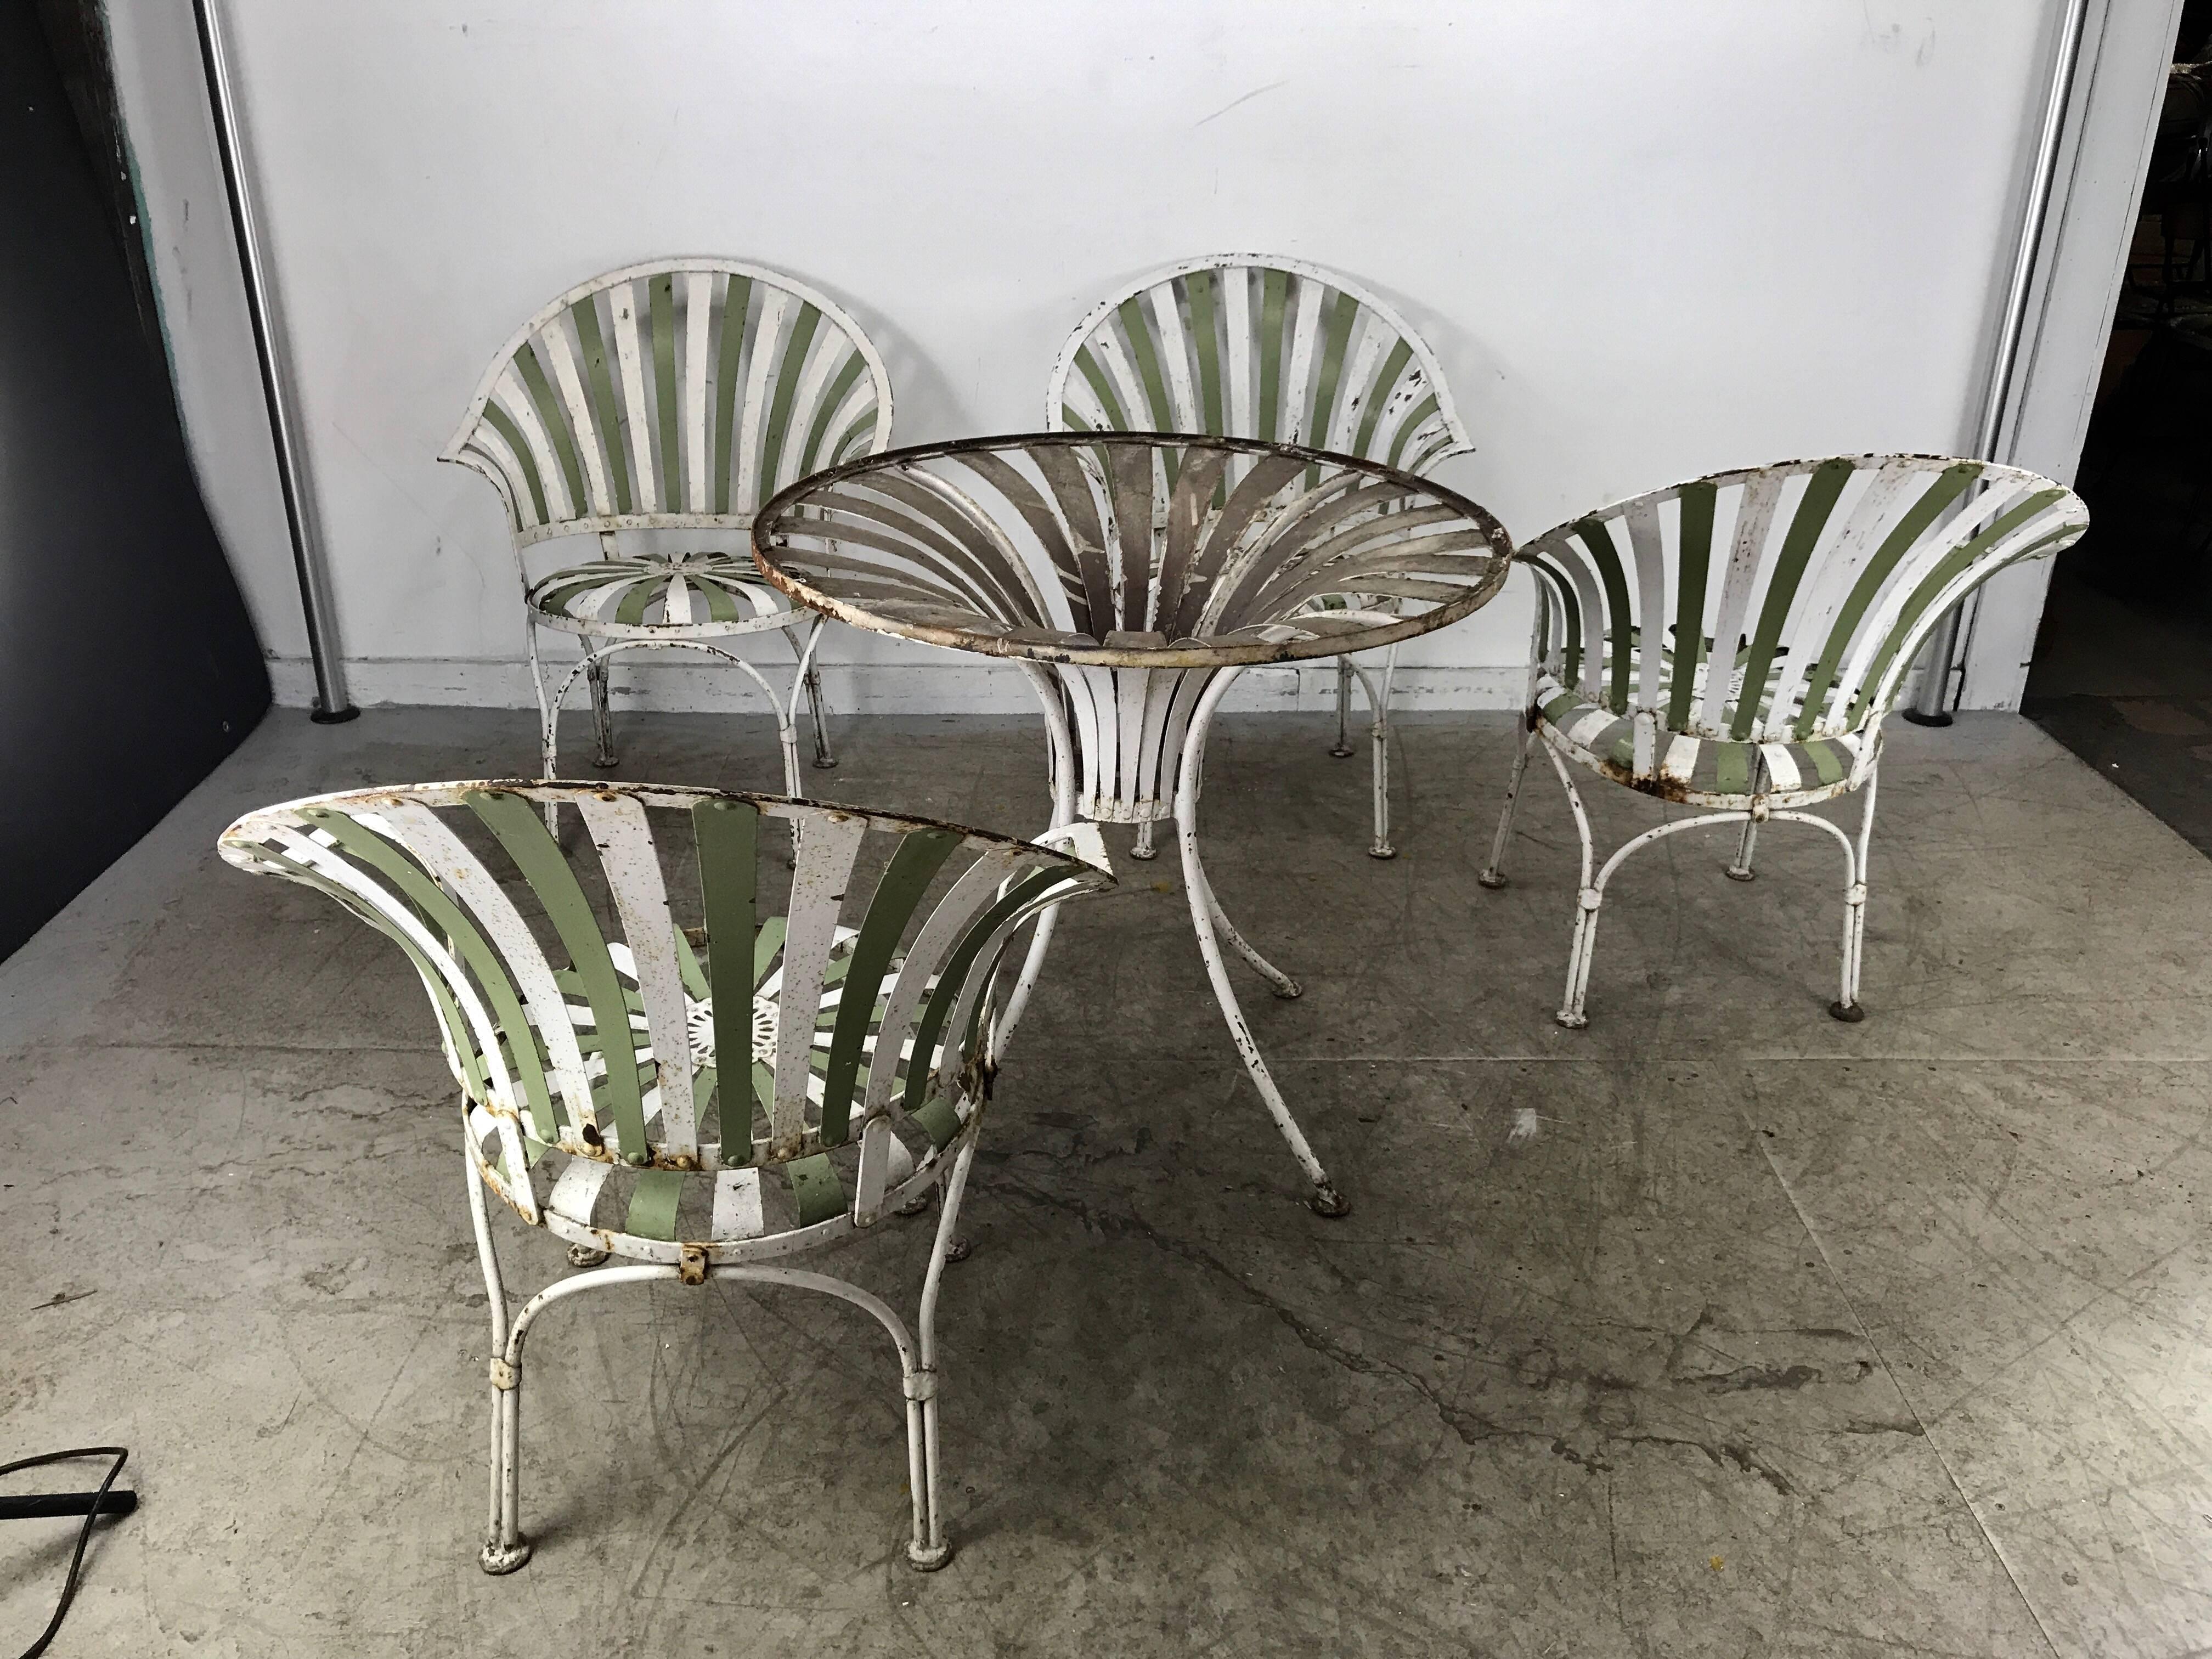 1930s Art Deco metal fan back garden set, table and chairs by Francois Carre. Consisting of four fan back armchairs and table base, in as found condition, some rust but no breaks or re welds, chairs measure 32 in. H x 24.5 in. W x 26 in. D,, hand